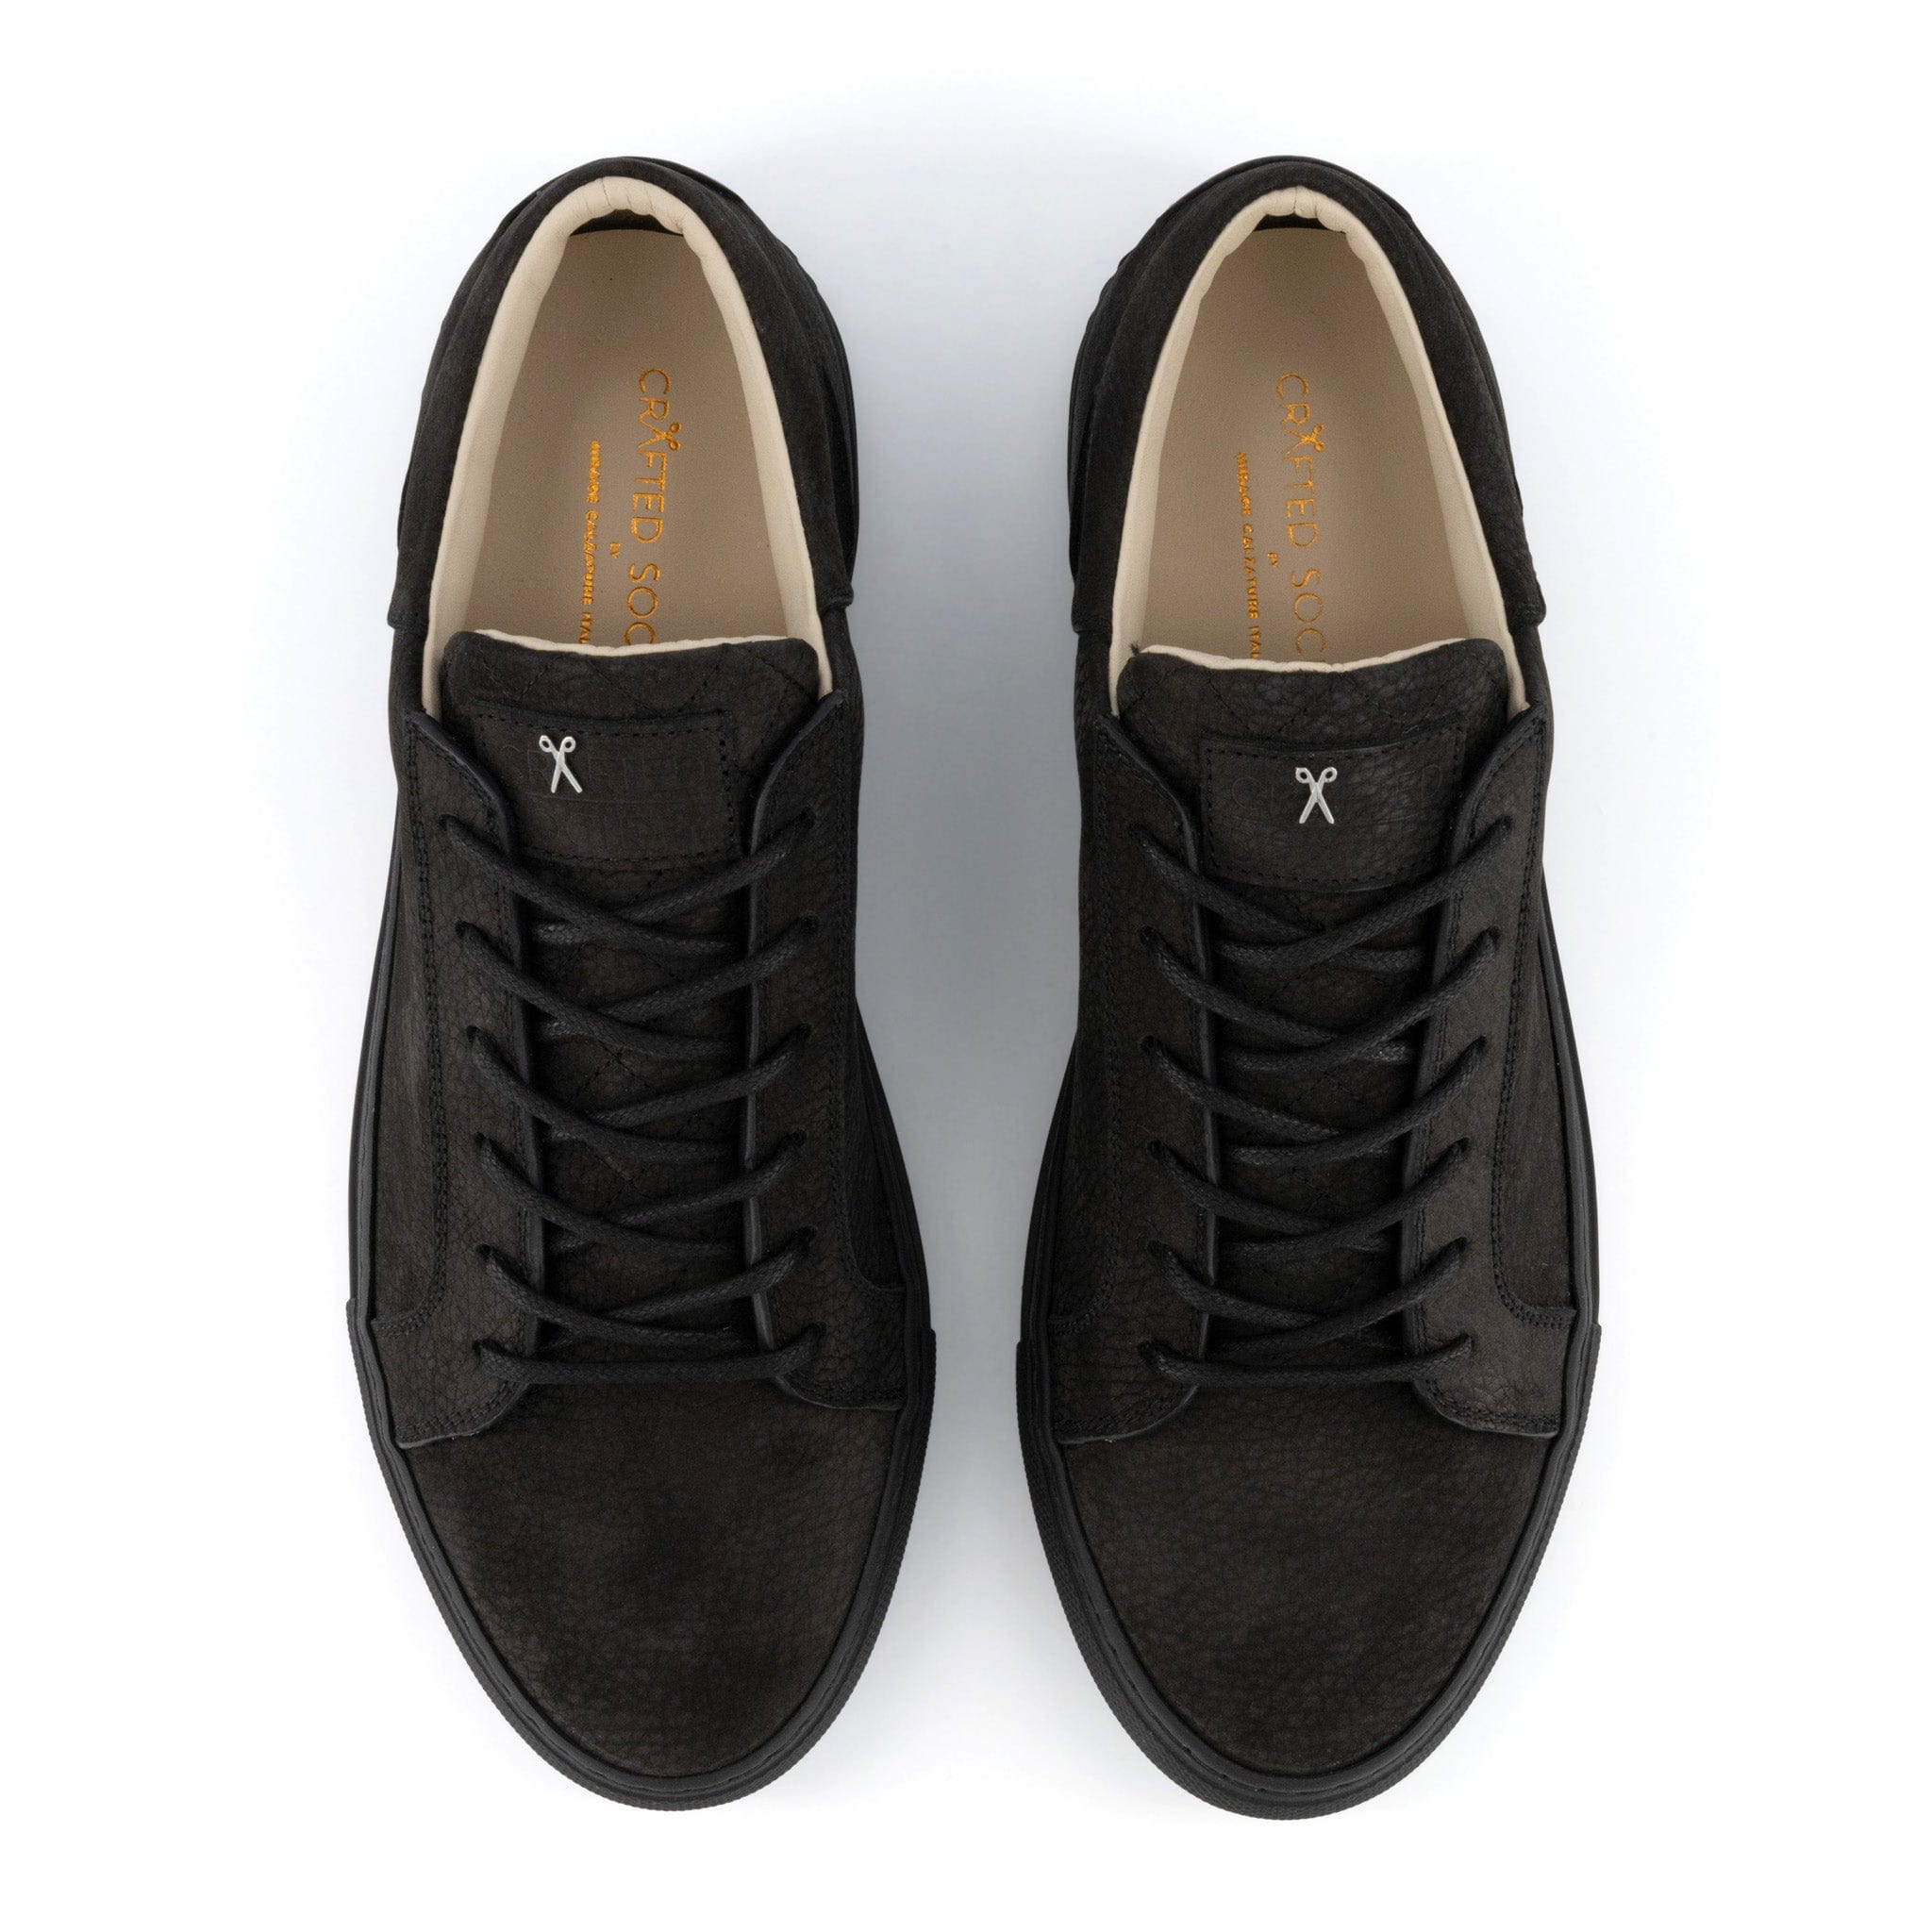 Mario Low Refined Sneaker | Black Nubuck | Black Outsole | Made in Italy